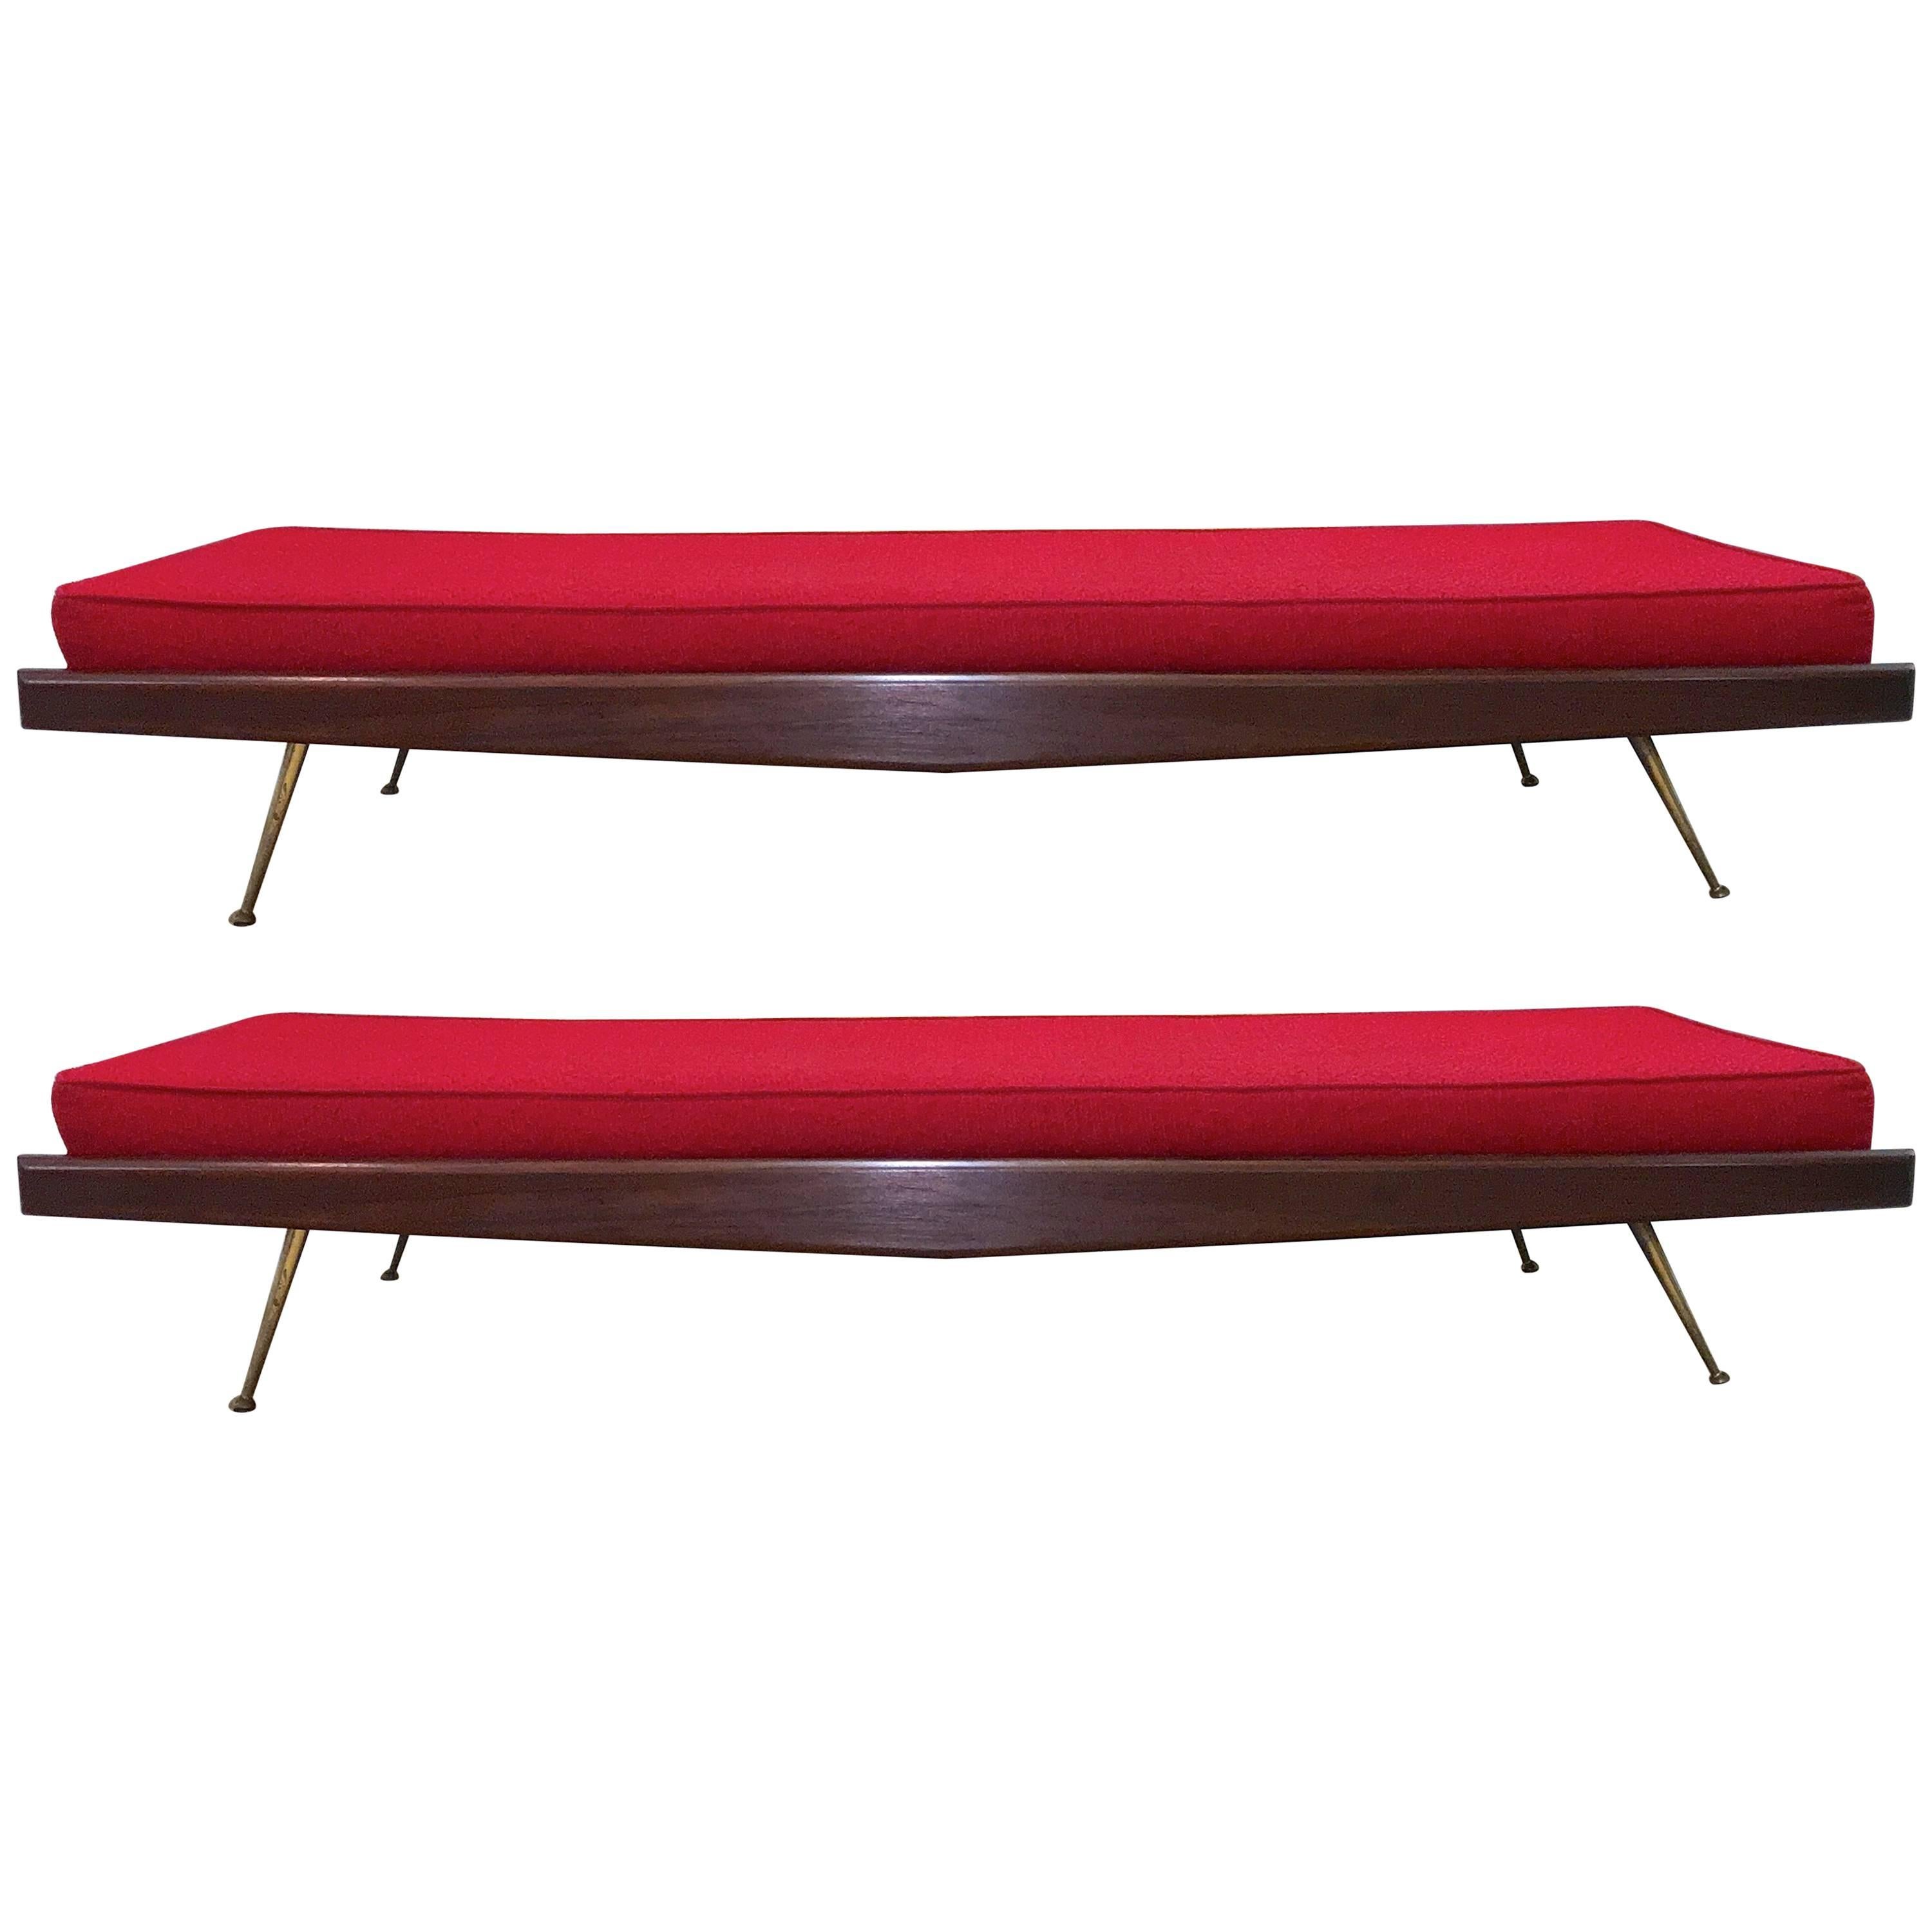 Pair of Midcentury Walnut Daybeds with Brass Legs after Robsjohn-Gibbings